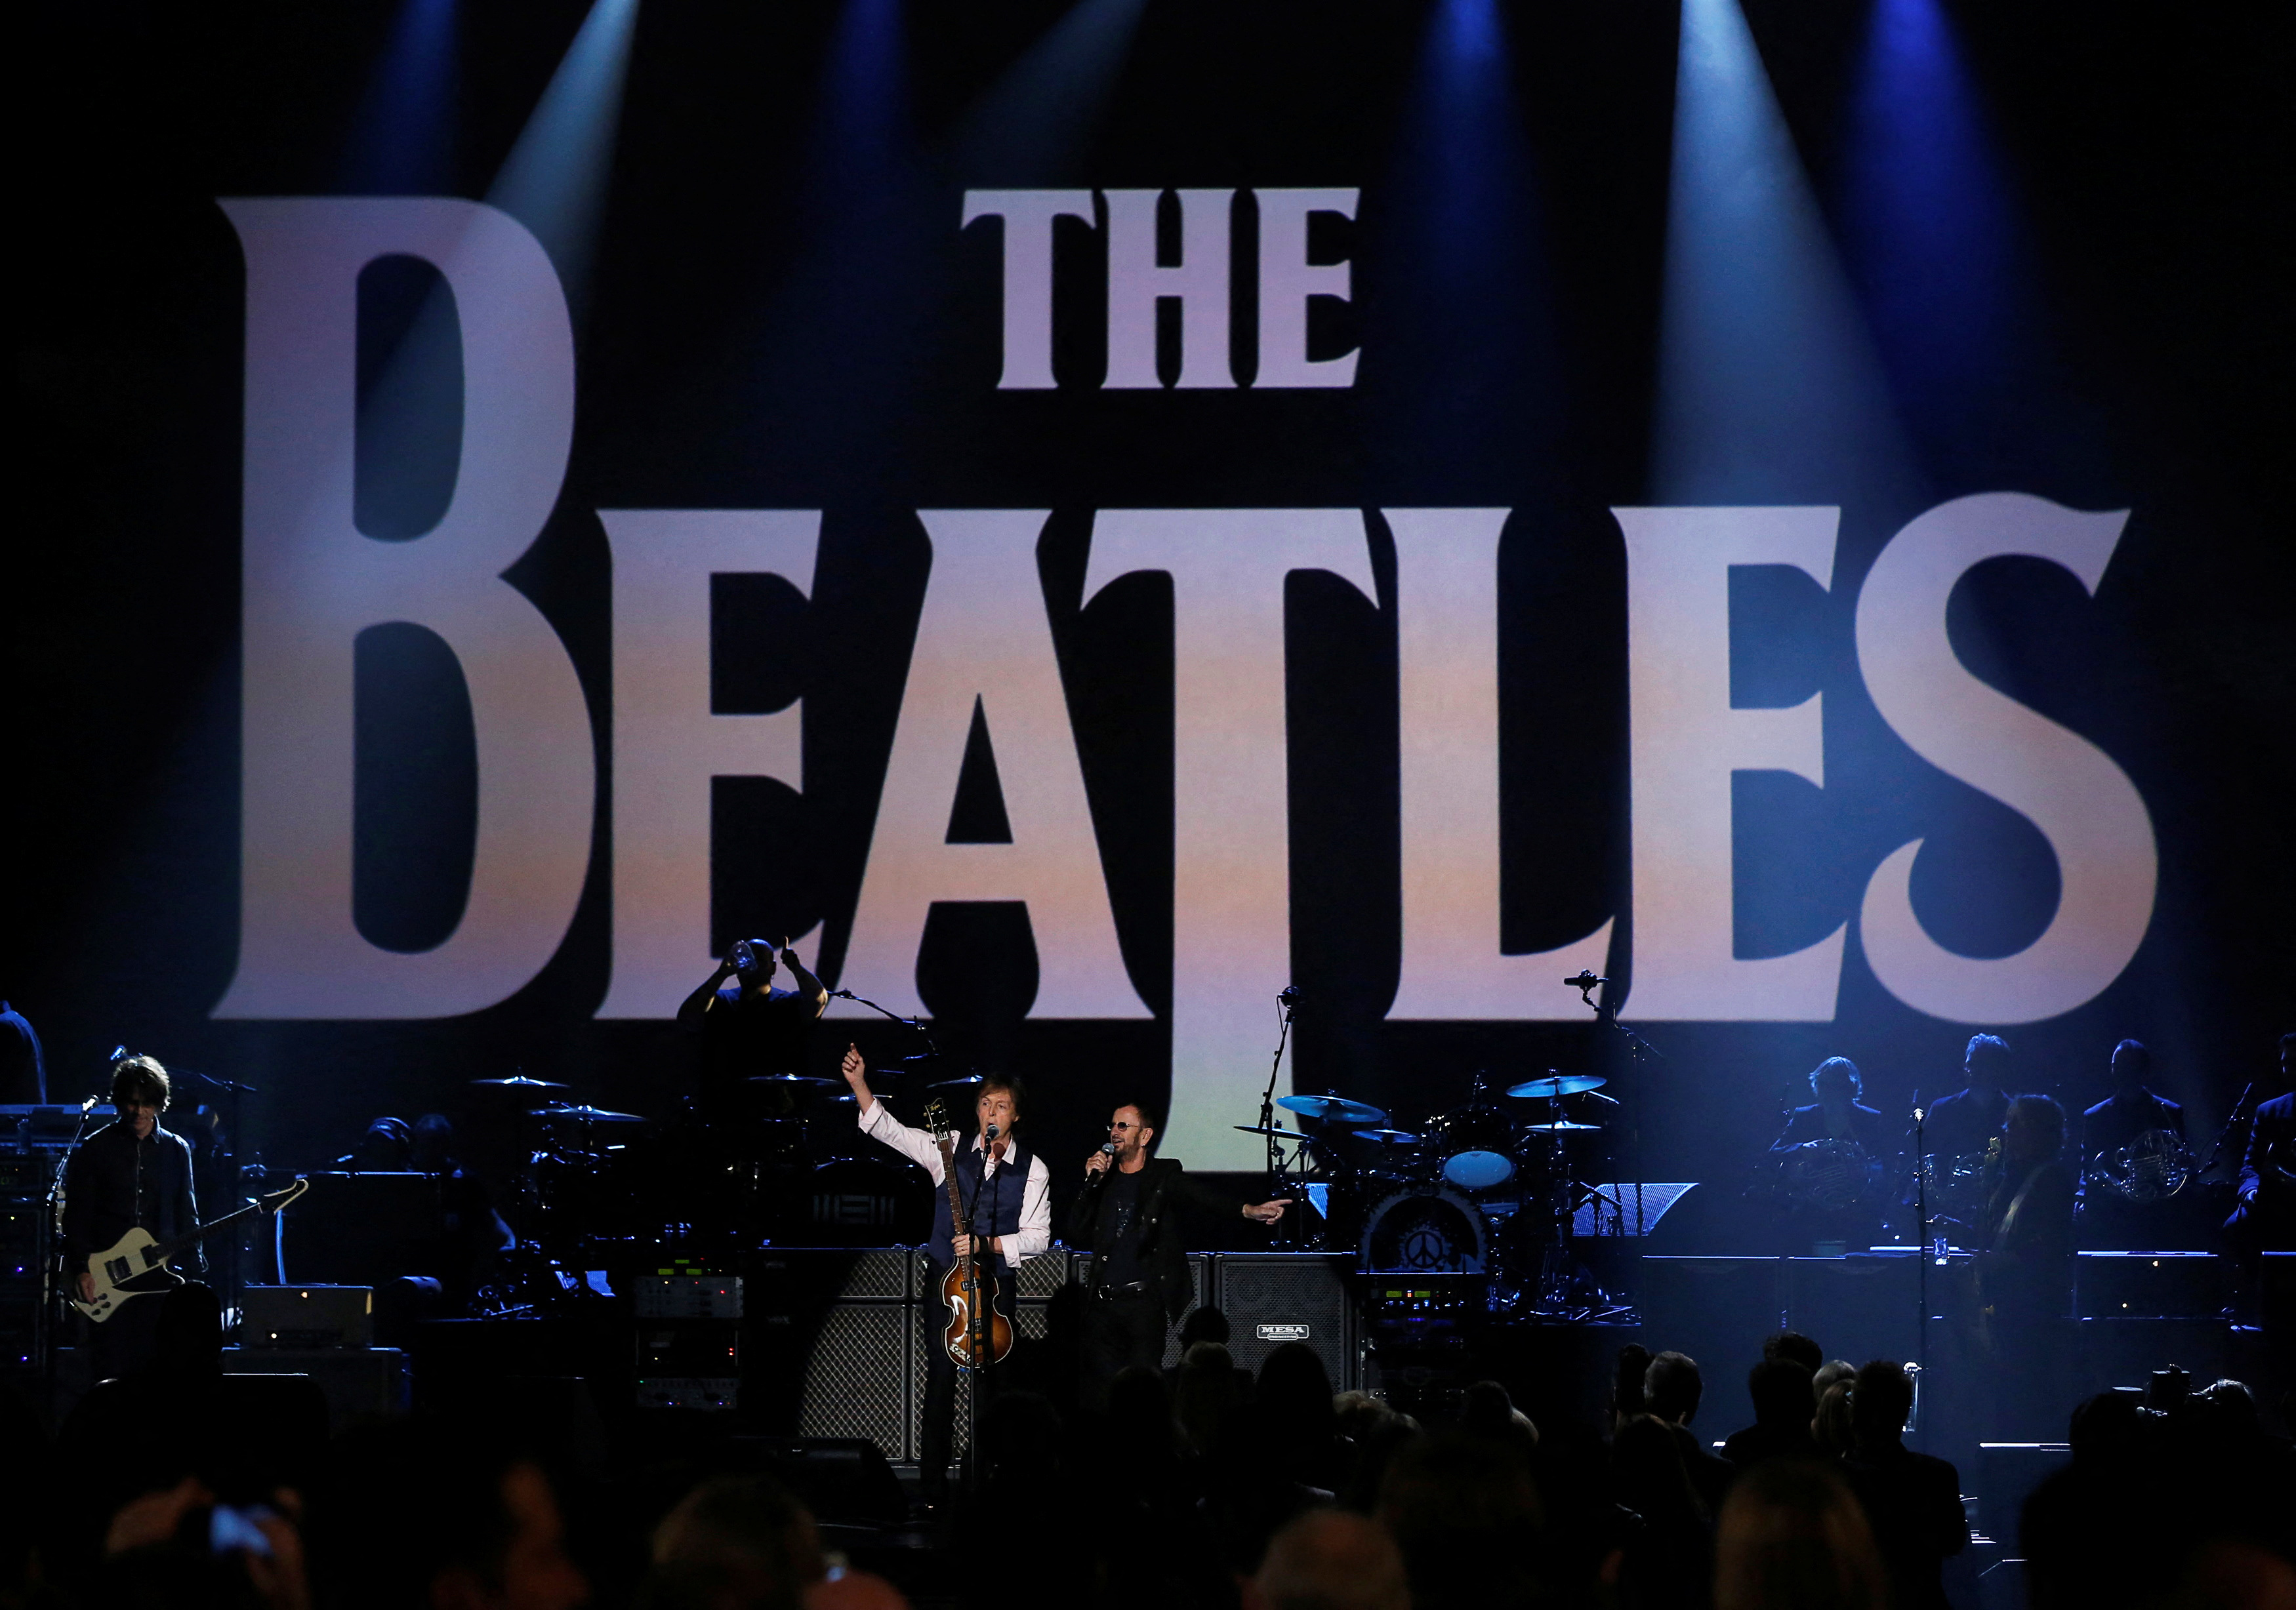 The Beatles are releasing their 'final' record, with the help of